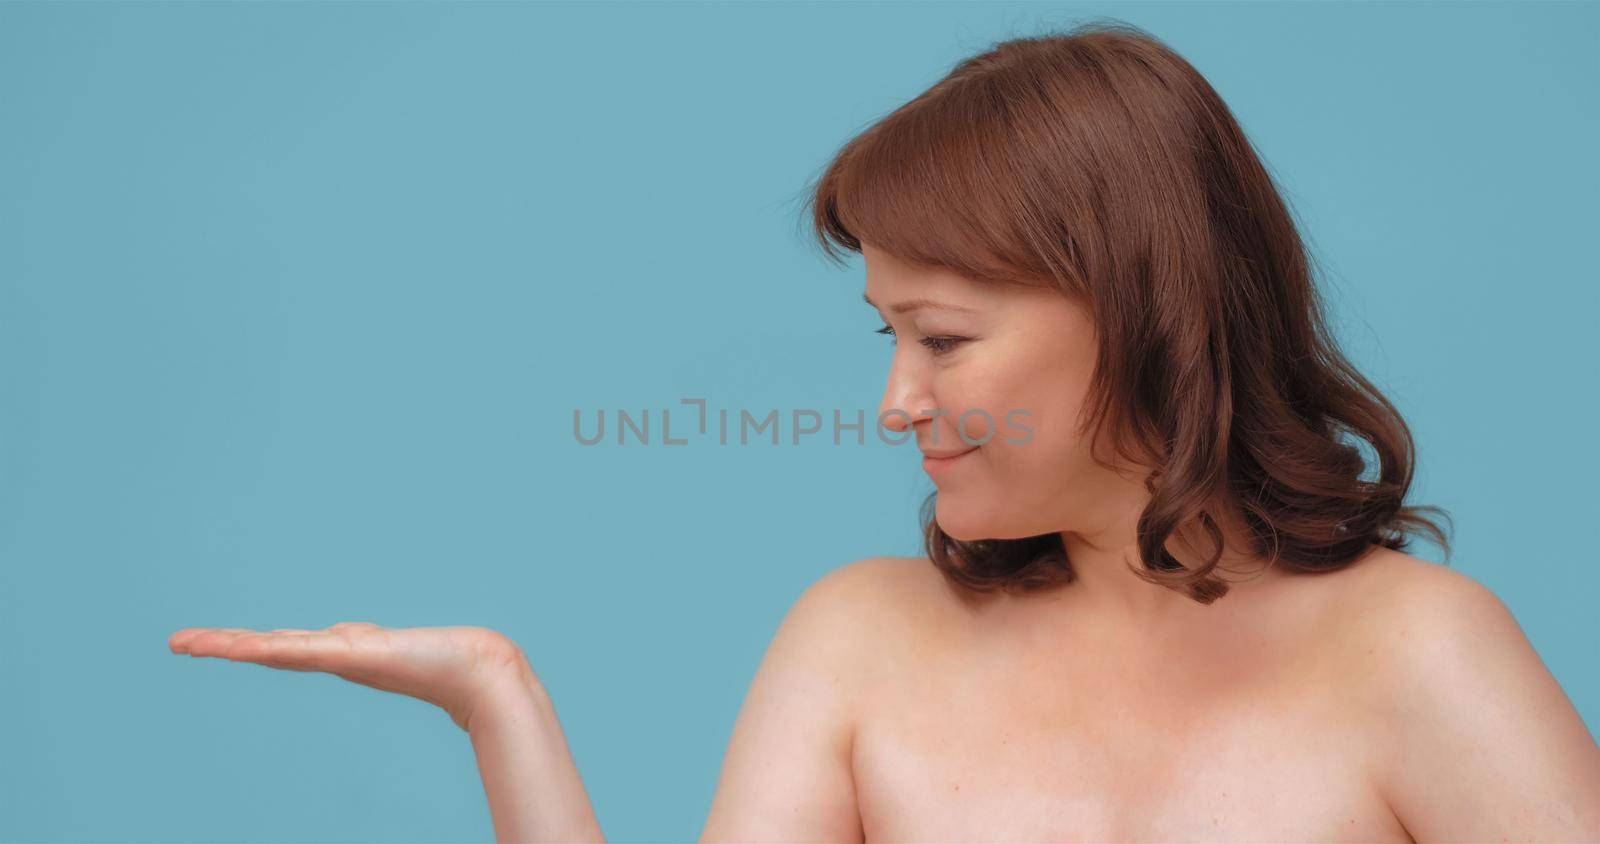 Cheerful mature woman holding open hand for embedding skin care visualization. Smiling woman advertise anti-age cream isolated on color background.